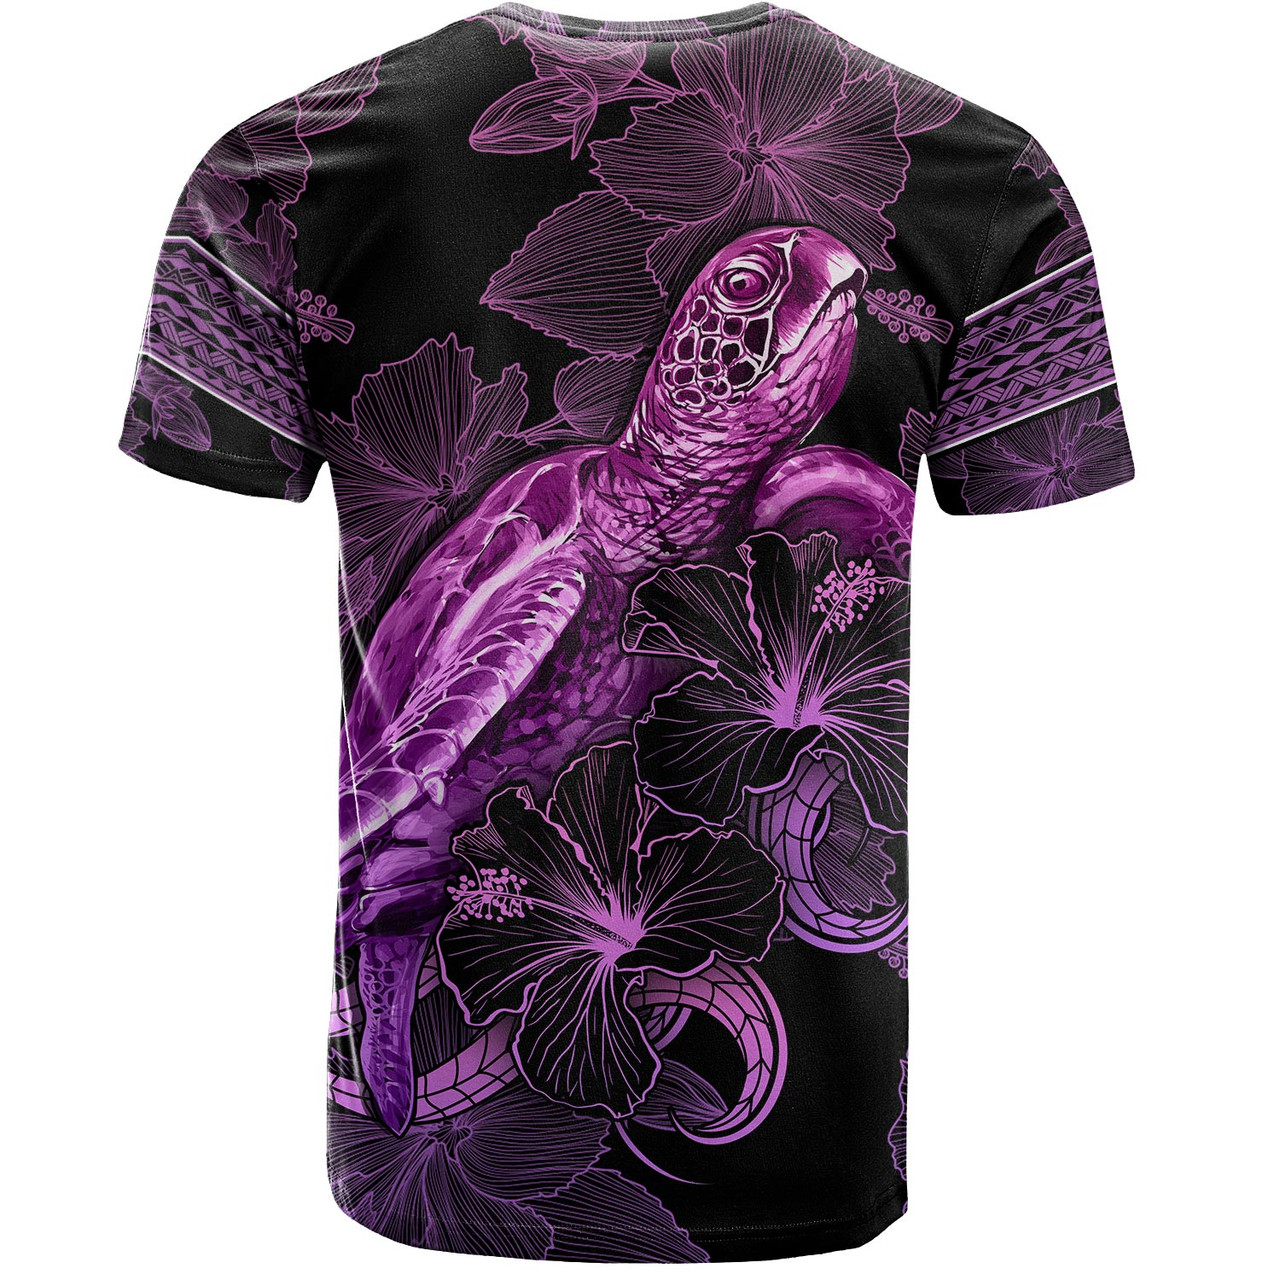 French Polynesia T-Shirt Sea Turtle With Blooming Hibiscus Flowers Tribal Purple